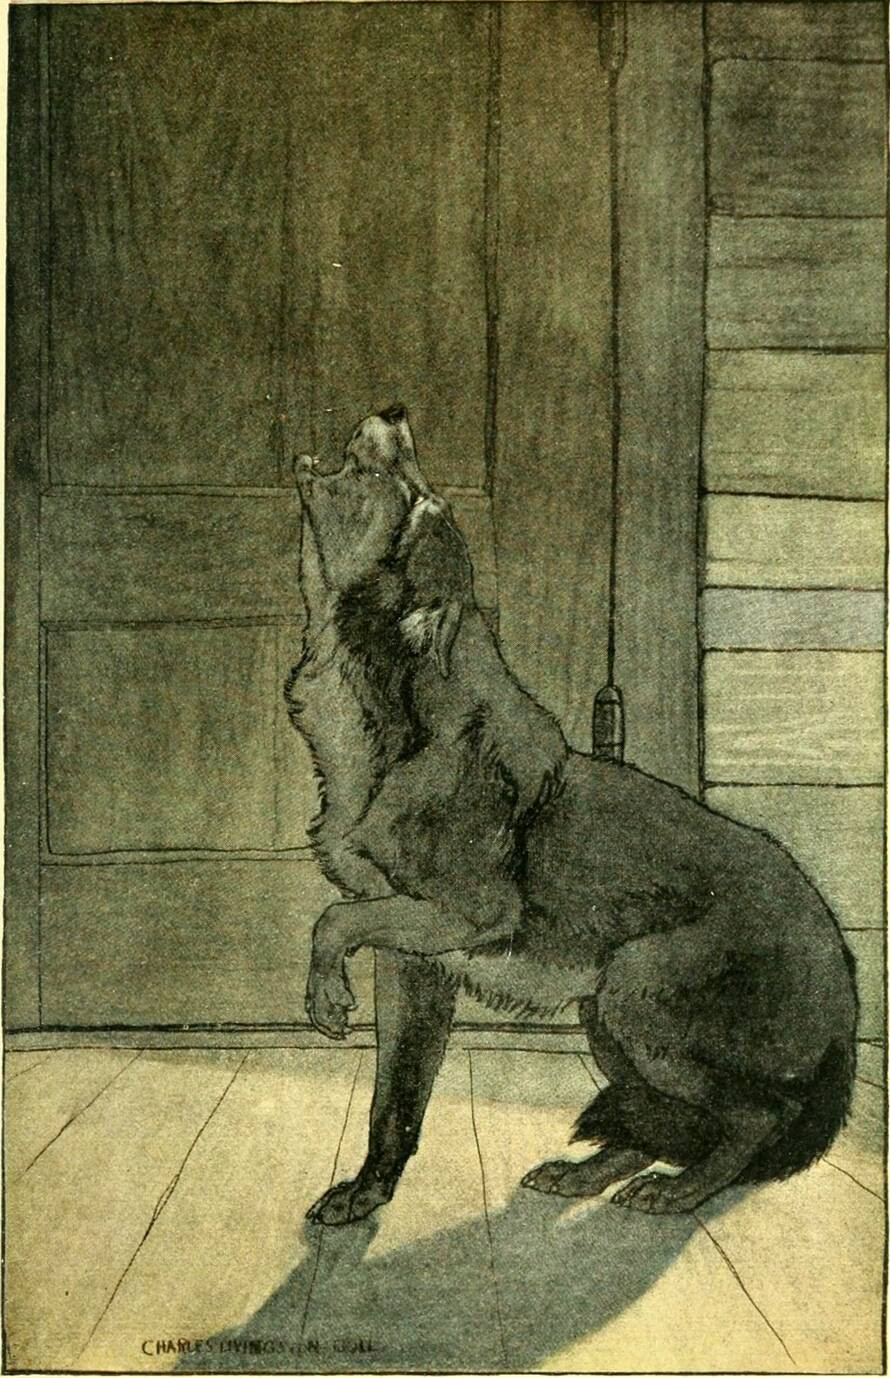 «White Fang was howling as dogs howl when their masters lie dead» (1906) White Fang by Jack London, illustrator: Charles Livingston Bull via Wikimedia Commons